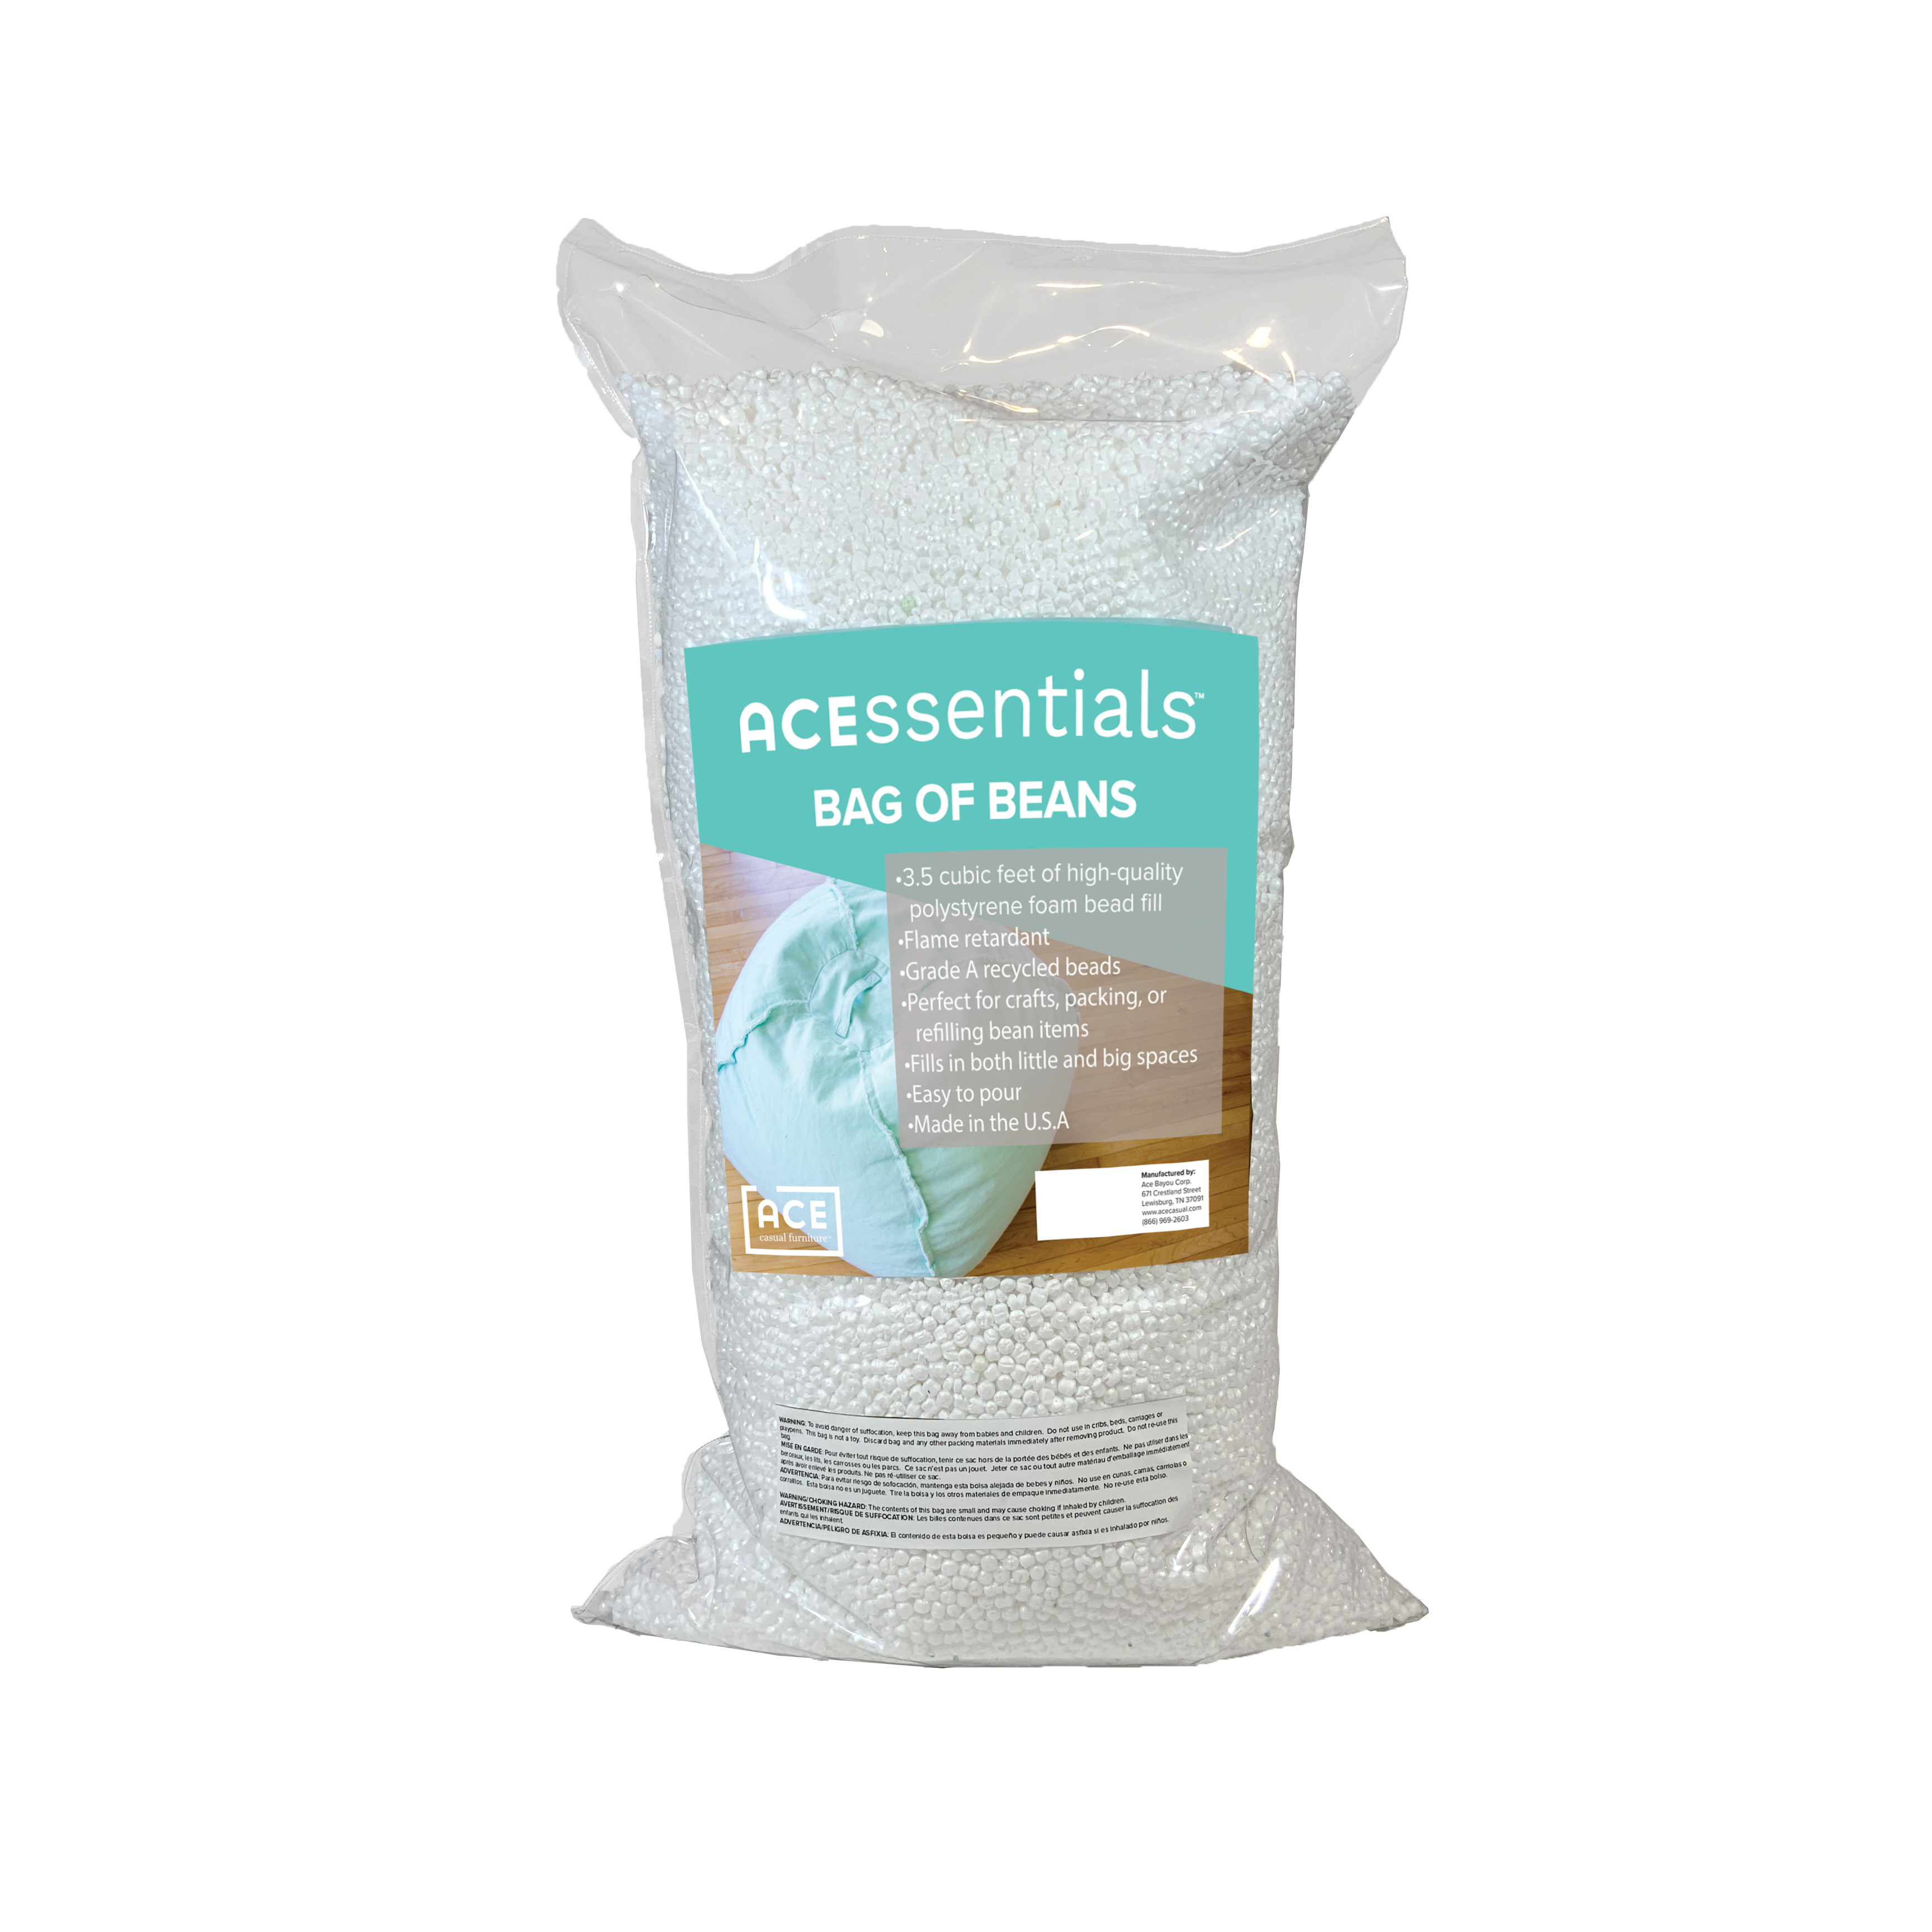 ACEssentials Polystyrene Bean Refill for Crafts and Filler for Bean Bag Chairs, 100 Liters, 3.5 Cubic feet - image 4 of 6